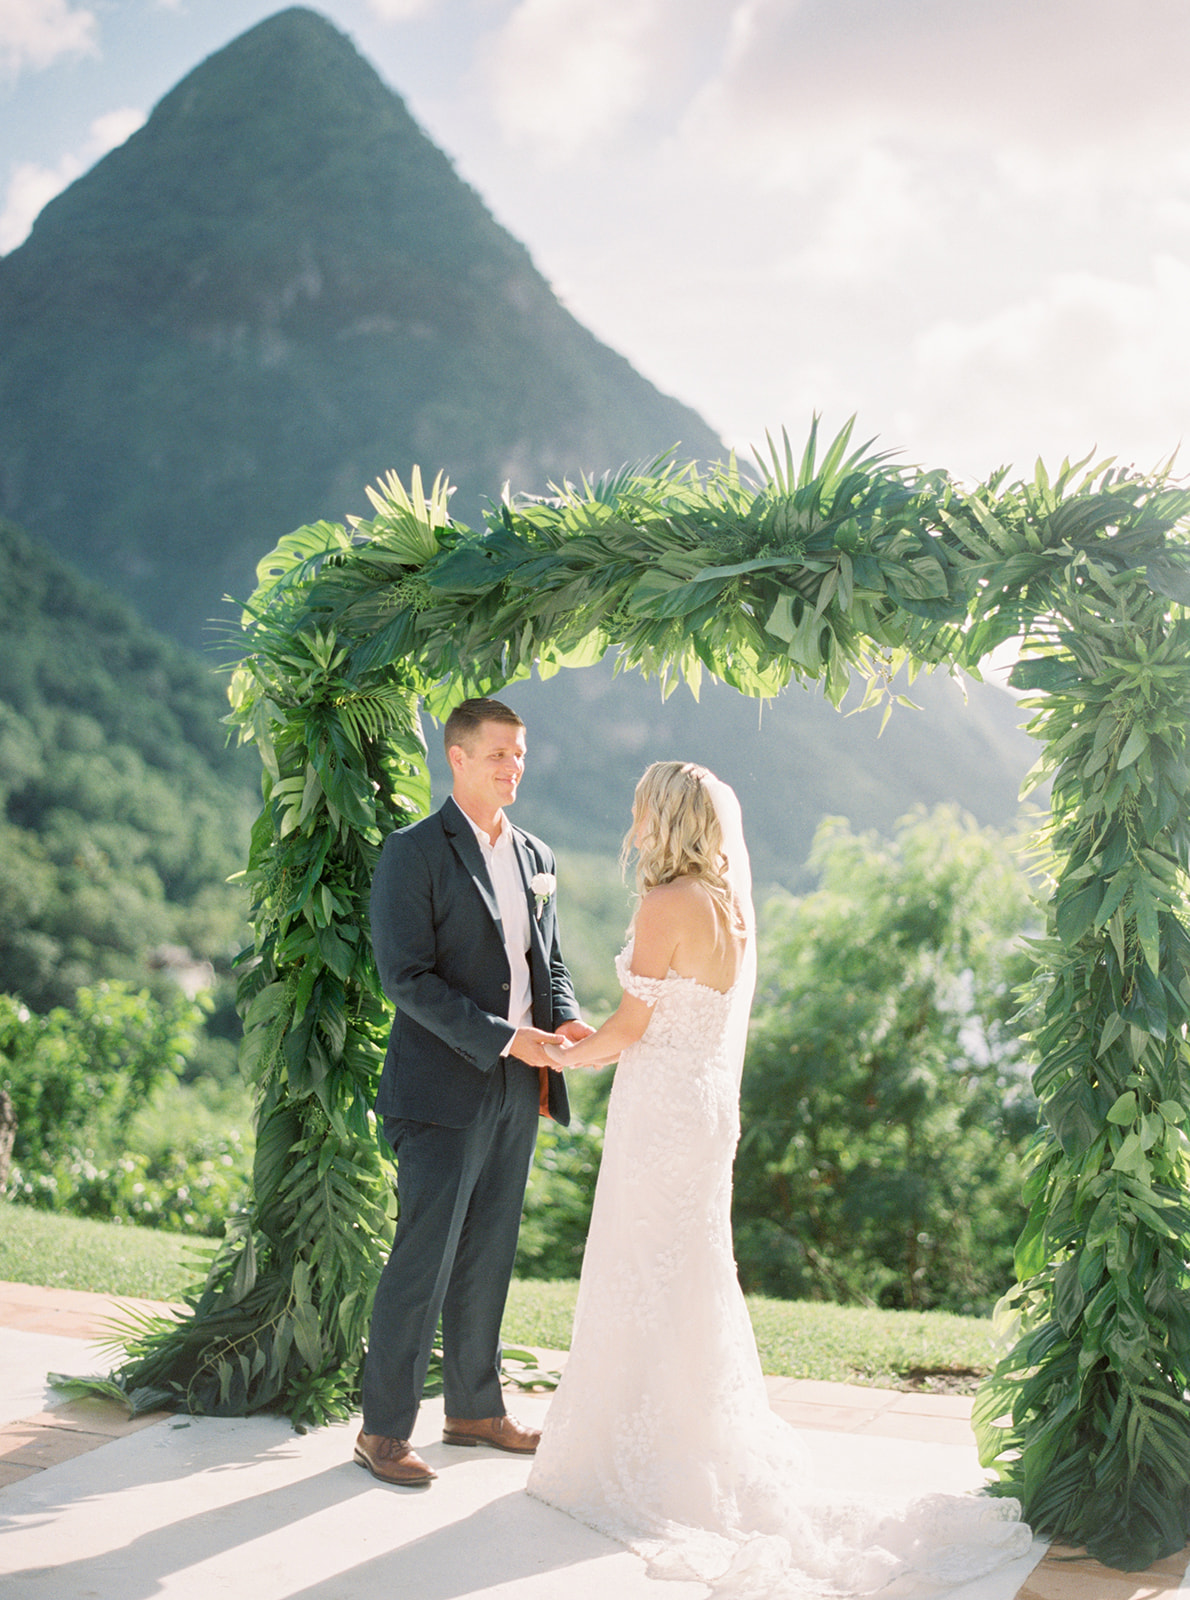 The private sunset deck provides an ideal wedding ceremony location with views of the Pitons at Sugar Beach Viceroy